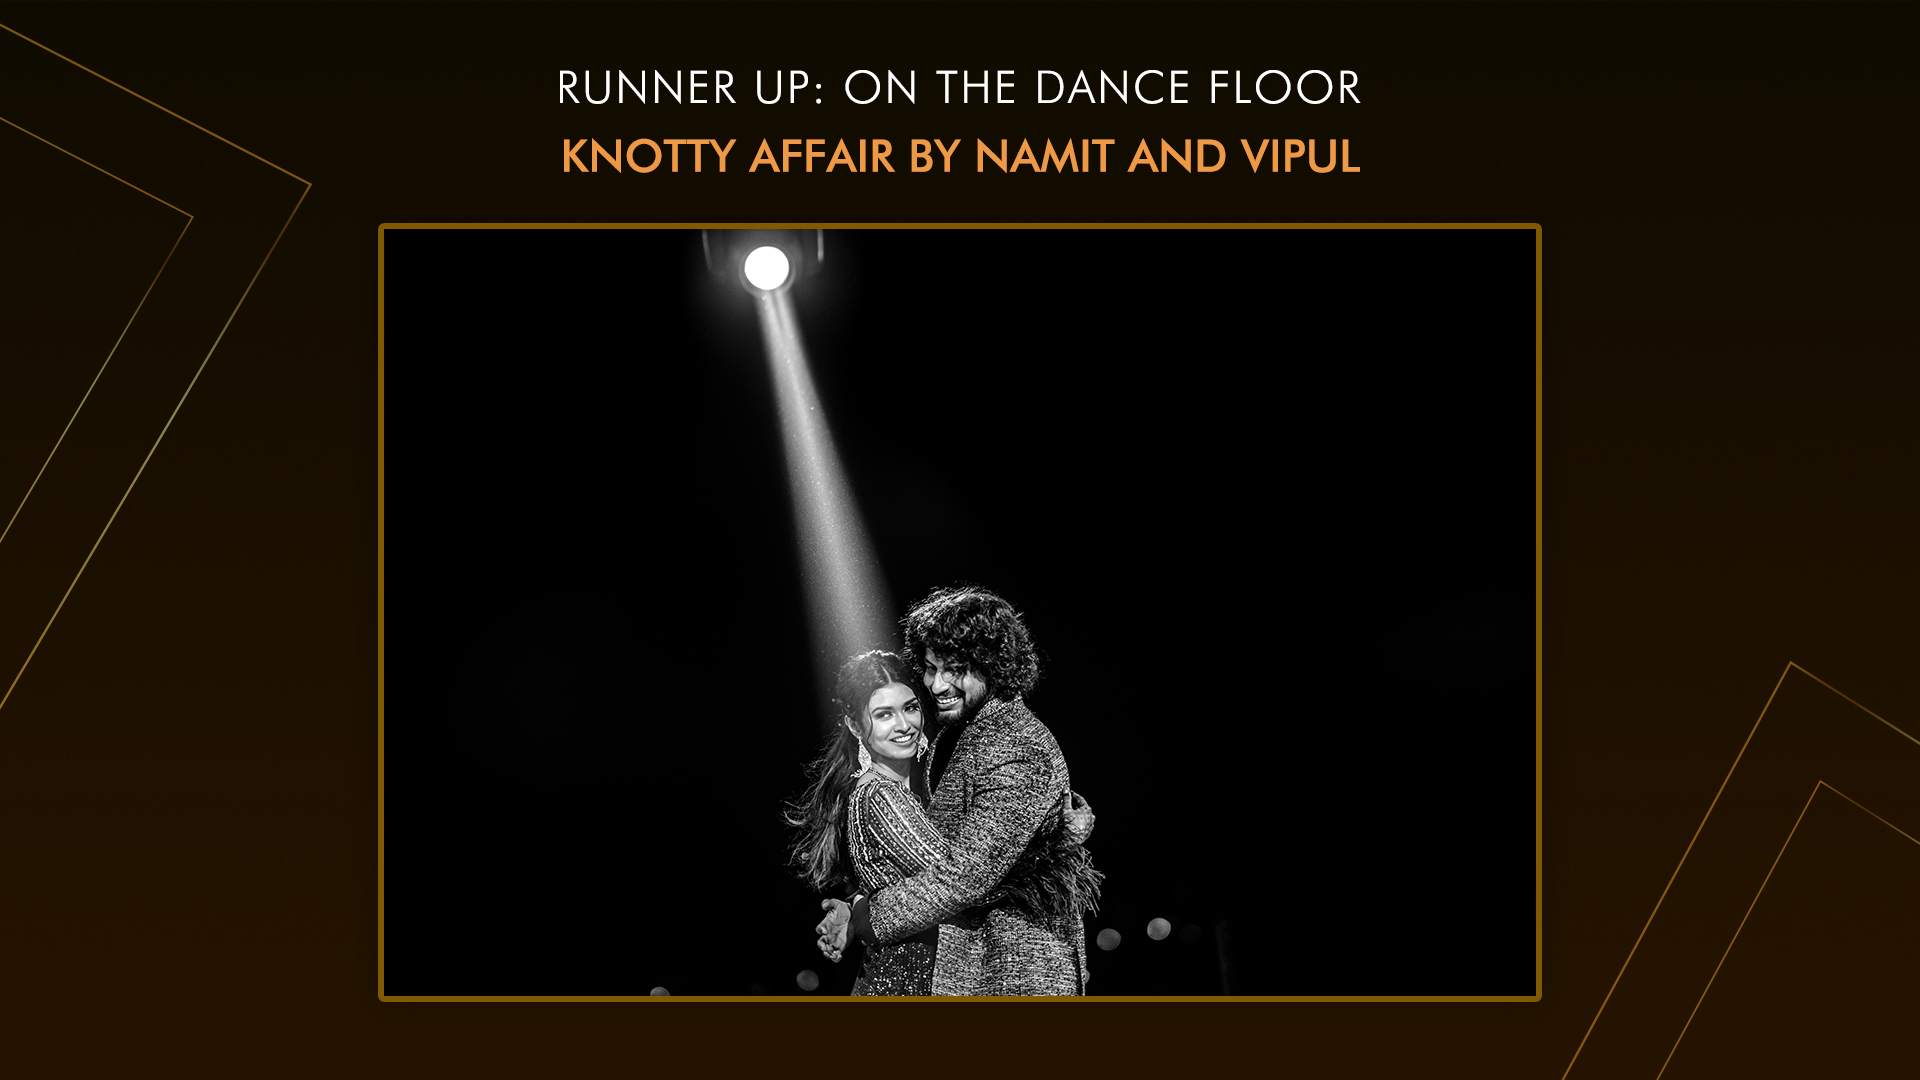 Knotty Affair by Namit and Vipul